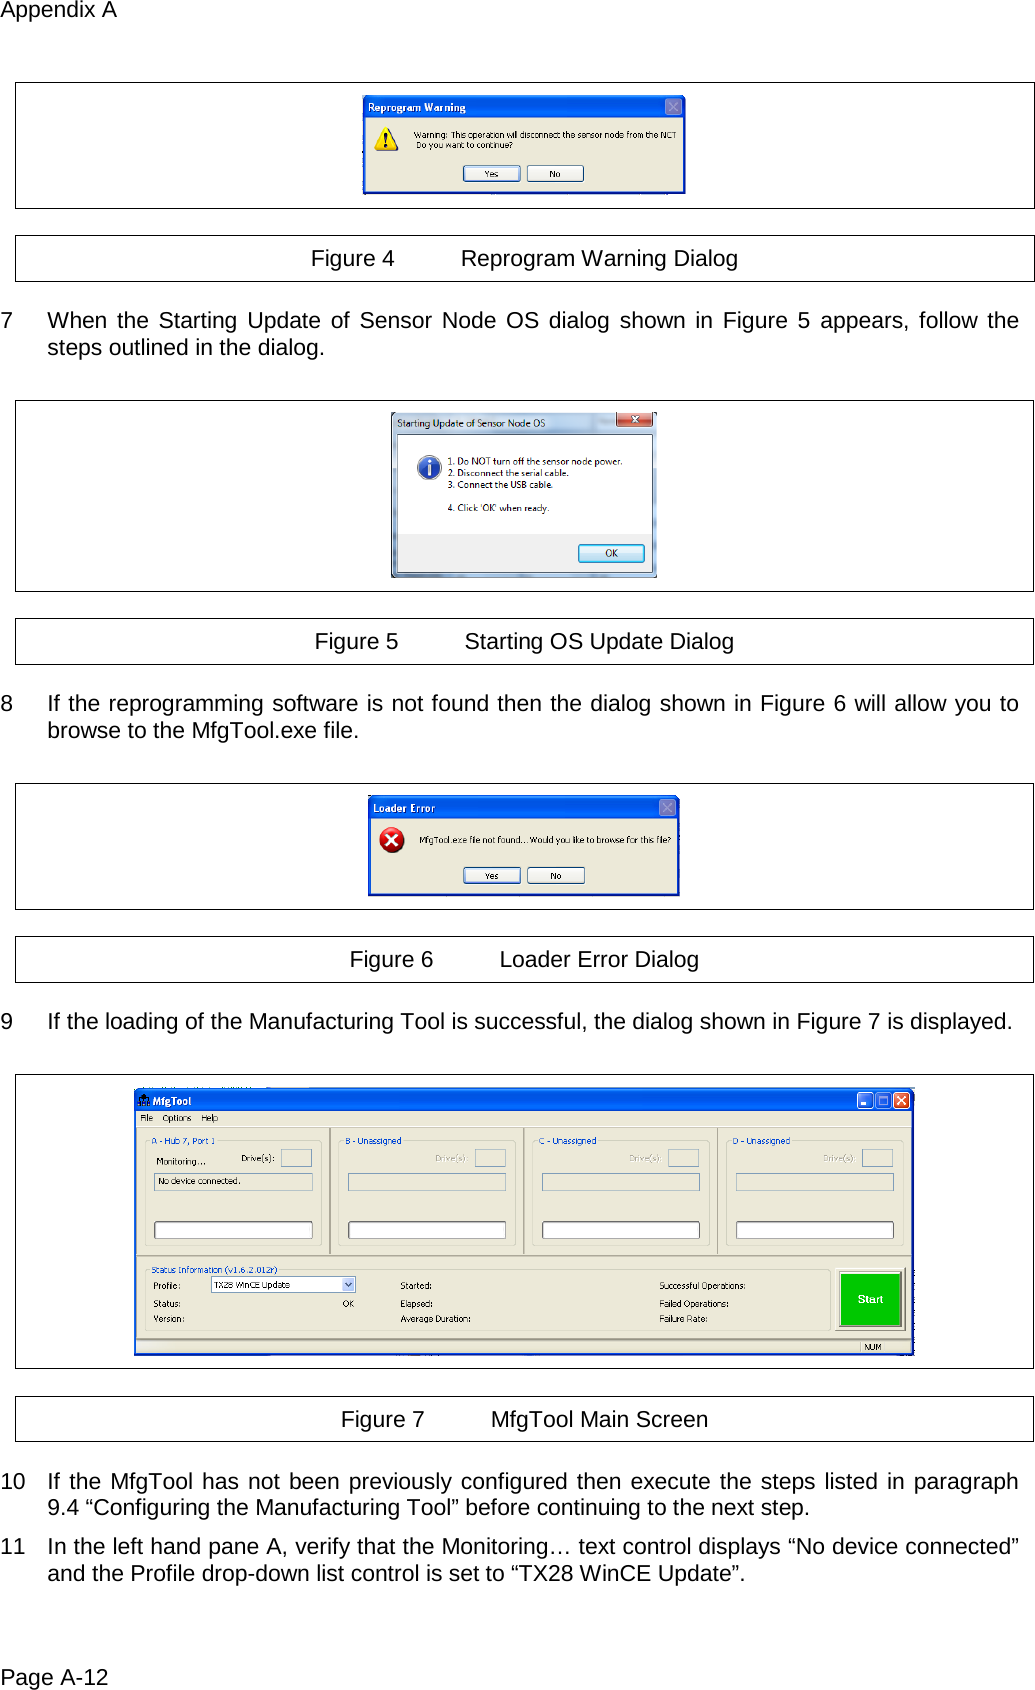 Appendix A Page A-12    Figure 4 Reprogram Warning Dialog  7  When the Starting Update of Sensor Node OS dialog shown in Figure 5 appears, follow the steps outlined in the dialog.    Figure 5 Starting OS Update Dialog  8  If the reprogramming software is not found then the dialog shown in Figure 6 will allow you to browse to the MfgTool.exe file.    Figure 6 Loader Error Dialog  9  If the loading of the Manufacturing Tool is successful, the dialog shown in Figure 7 is displayed.    Figure 7 MfgTool Main Screen  10 If the MfgTool has not been previously configured then execute the steps listed in paragraph 9.4 “Configuring the Manufacturing Tool” before continuing to the next step. 11 In the left hand pane A, verify that the Monitoring… text control displays “No device connected” and the Profile drop-down list control is set to “TX28 WinCE Update”. 